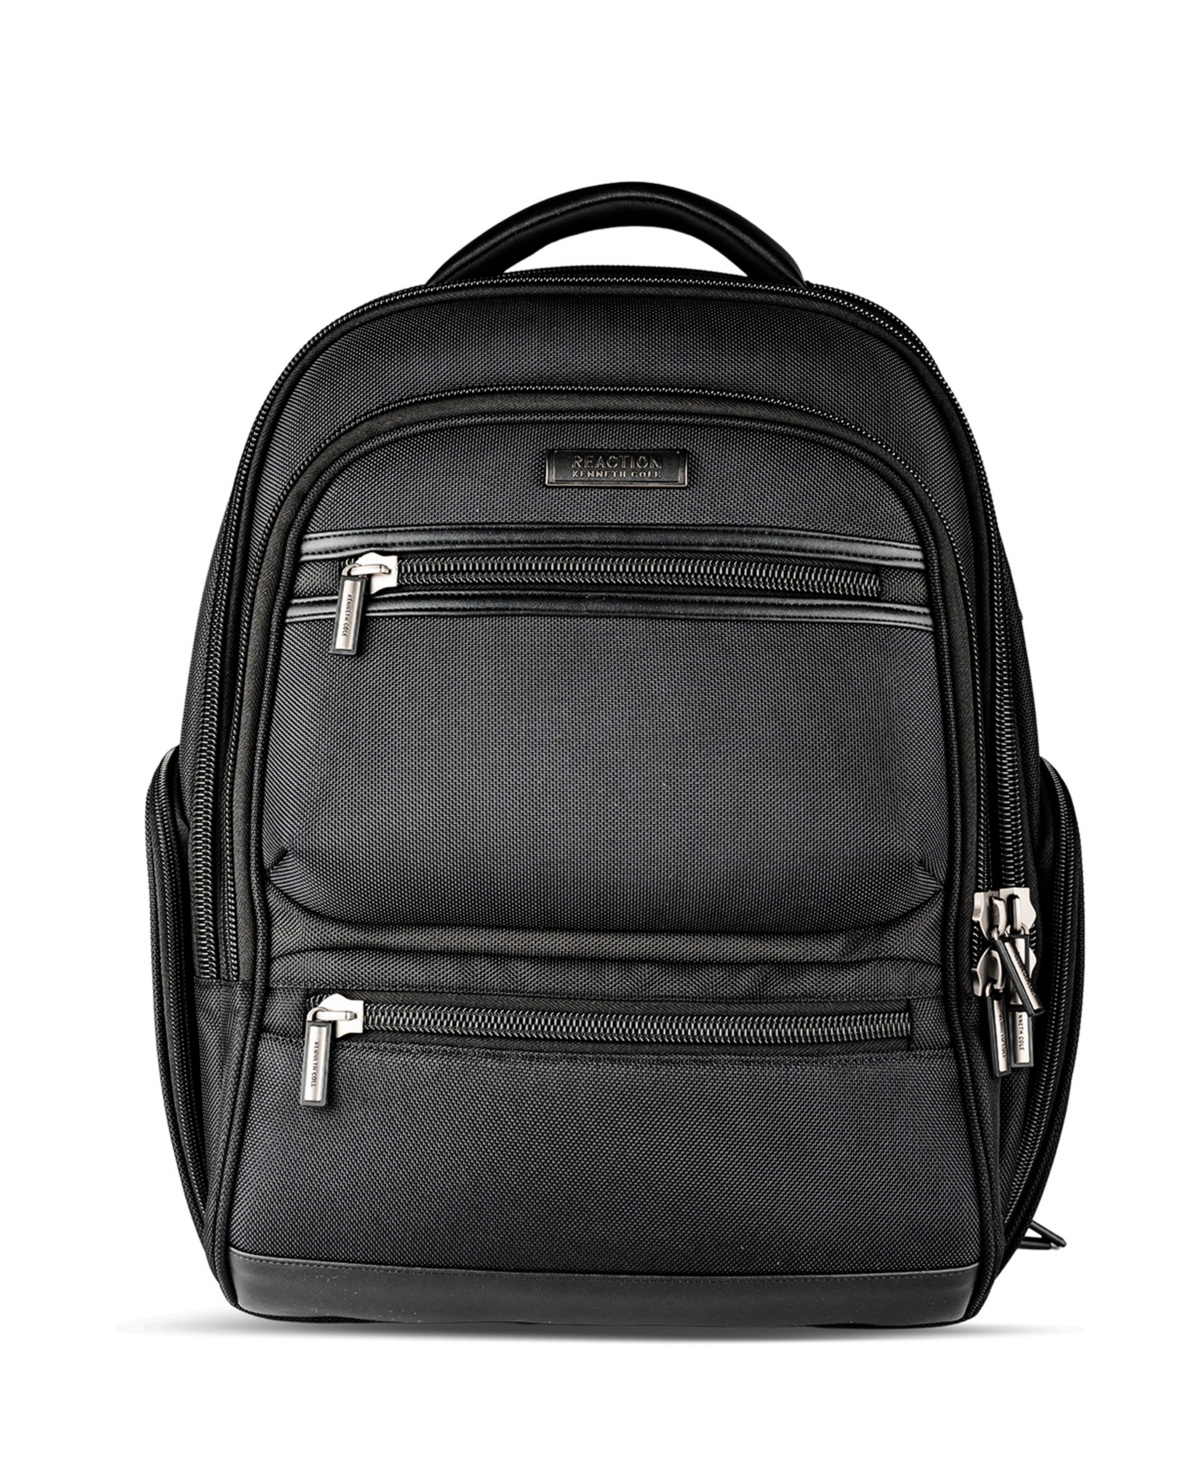 Tsa Checkpoint-Friendly 17" Laptop Backpack with Usb - Black